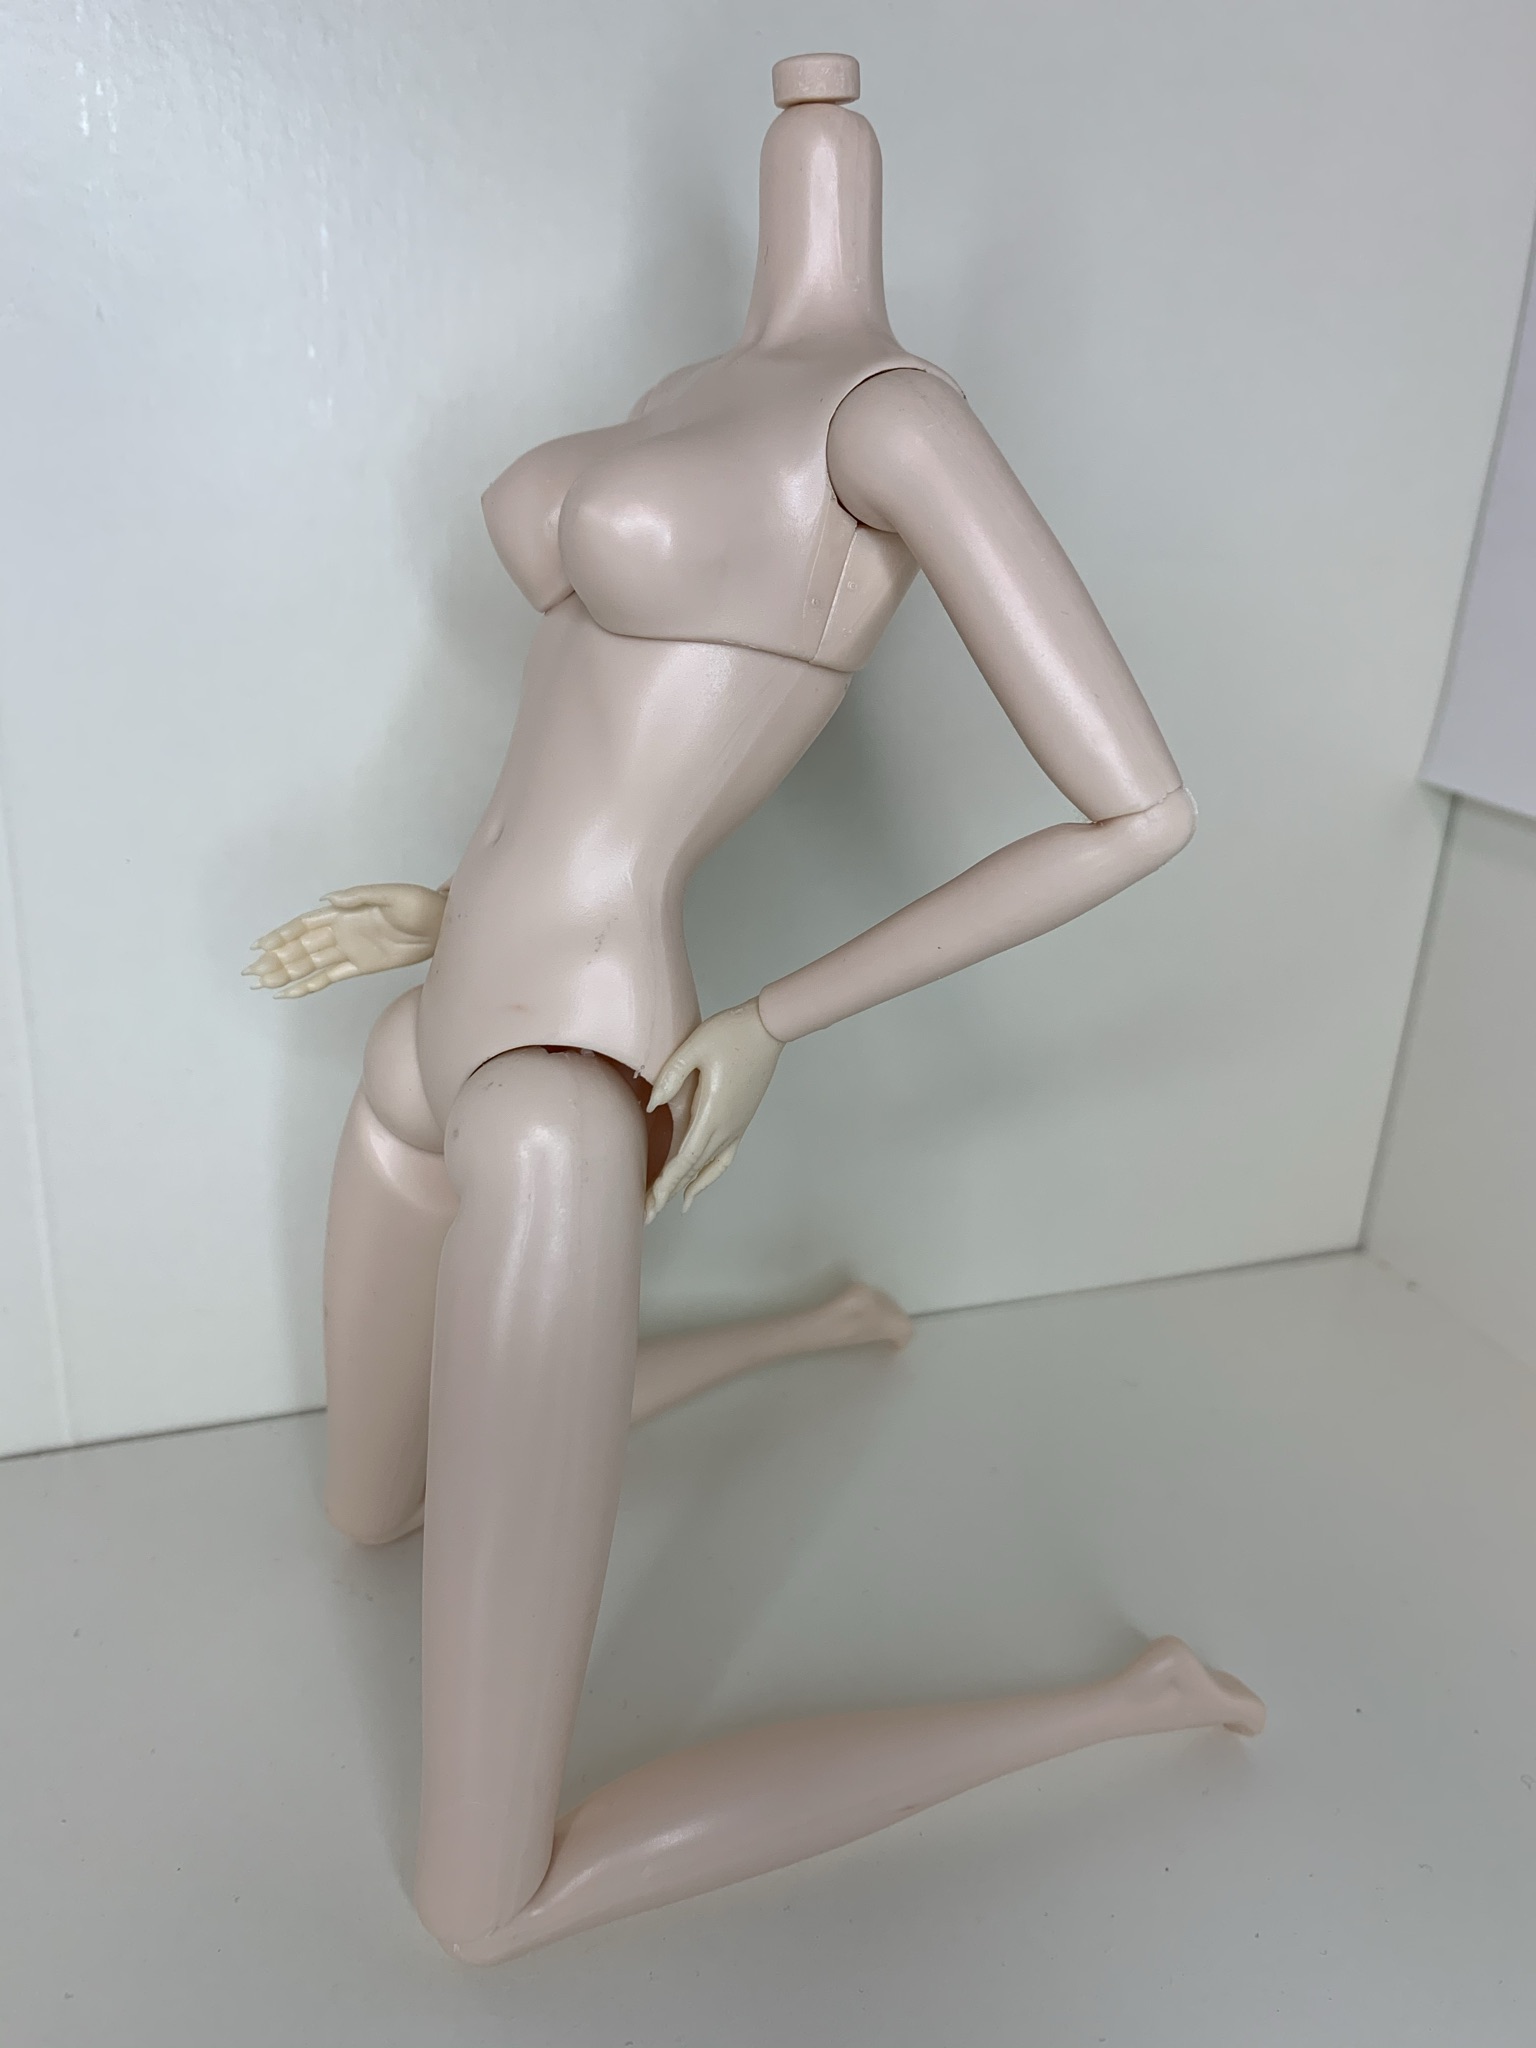 DIY OOAK Replacement SUPERMODEL Doll Body AA #4 Jointed Articulated By Eledoll 